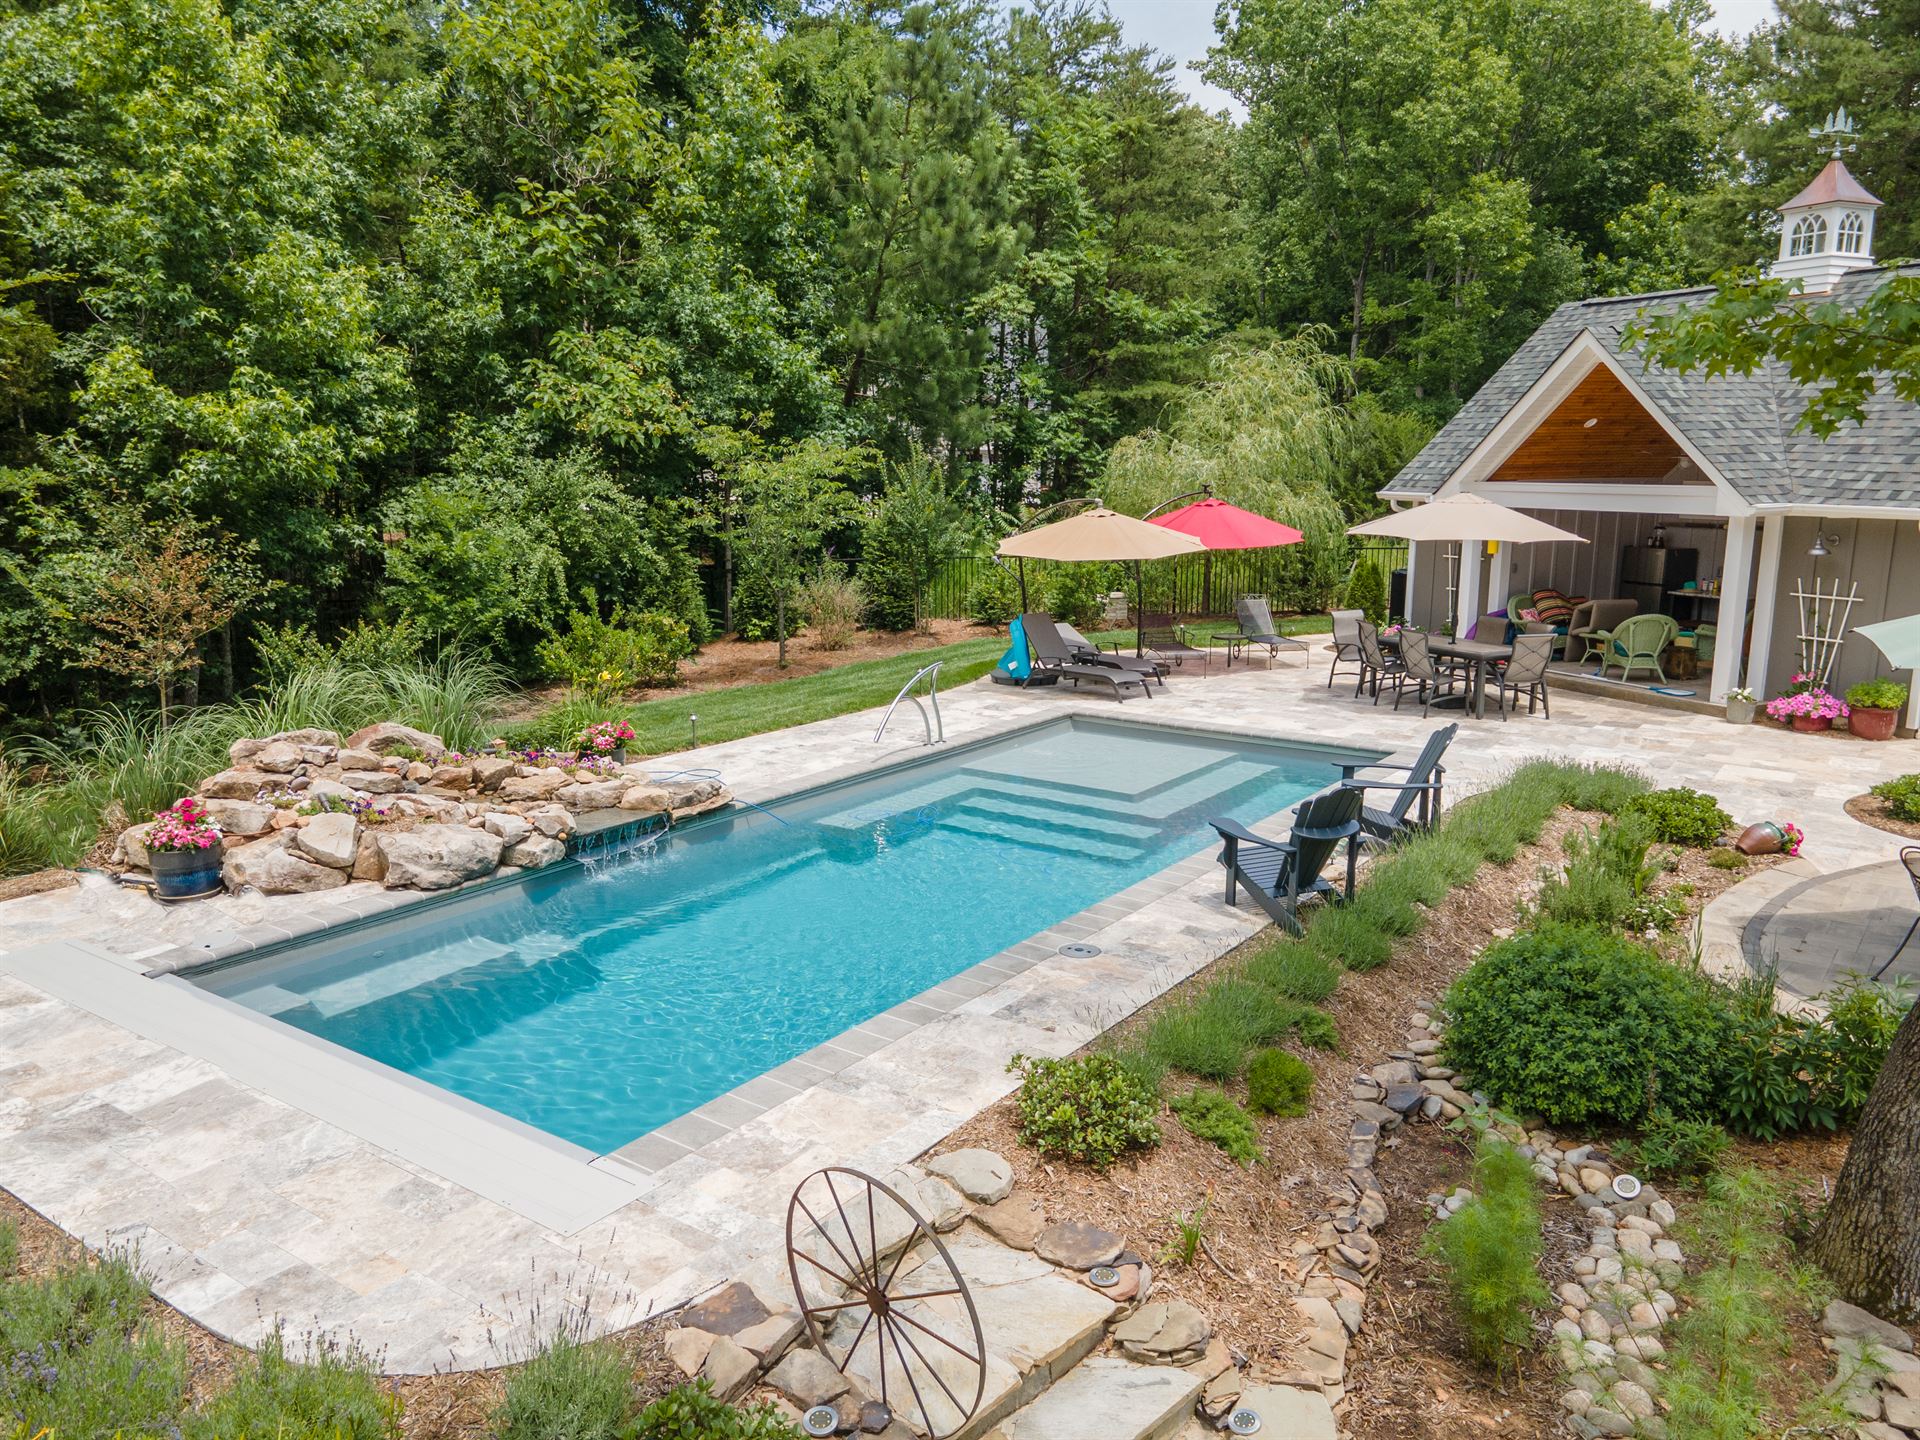 River Pools M35 in Diamond color with a cascade, natural stone patio, and concrete paver coping